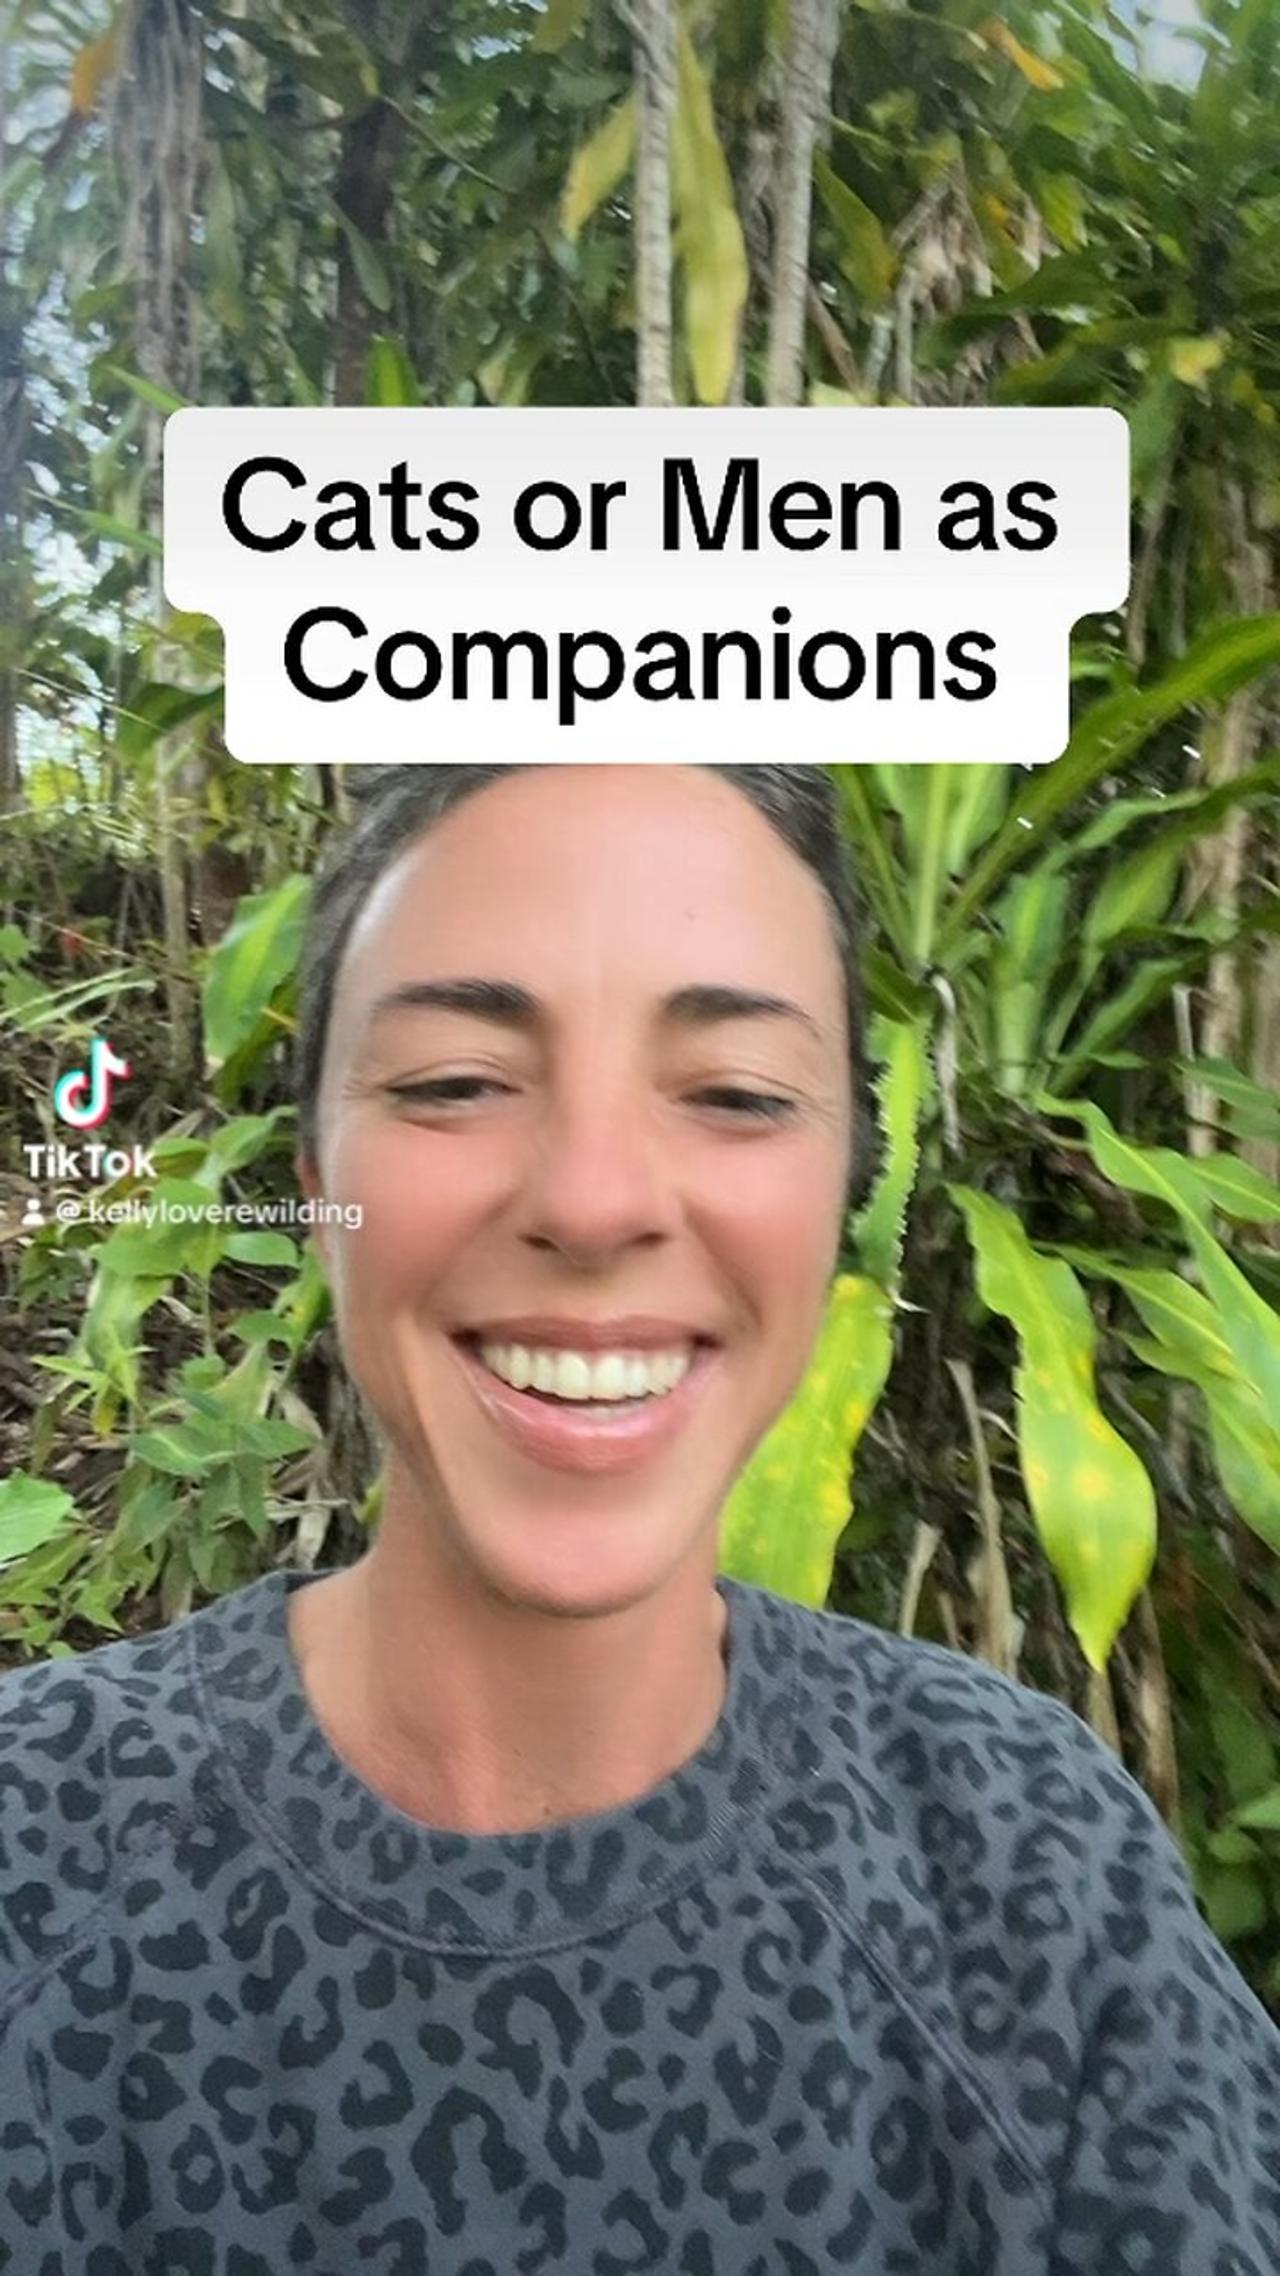 Cats or Men as Companions